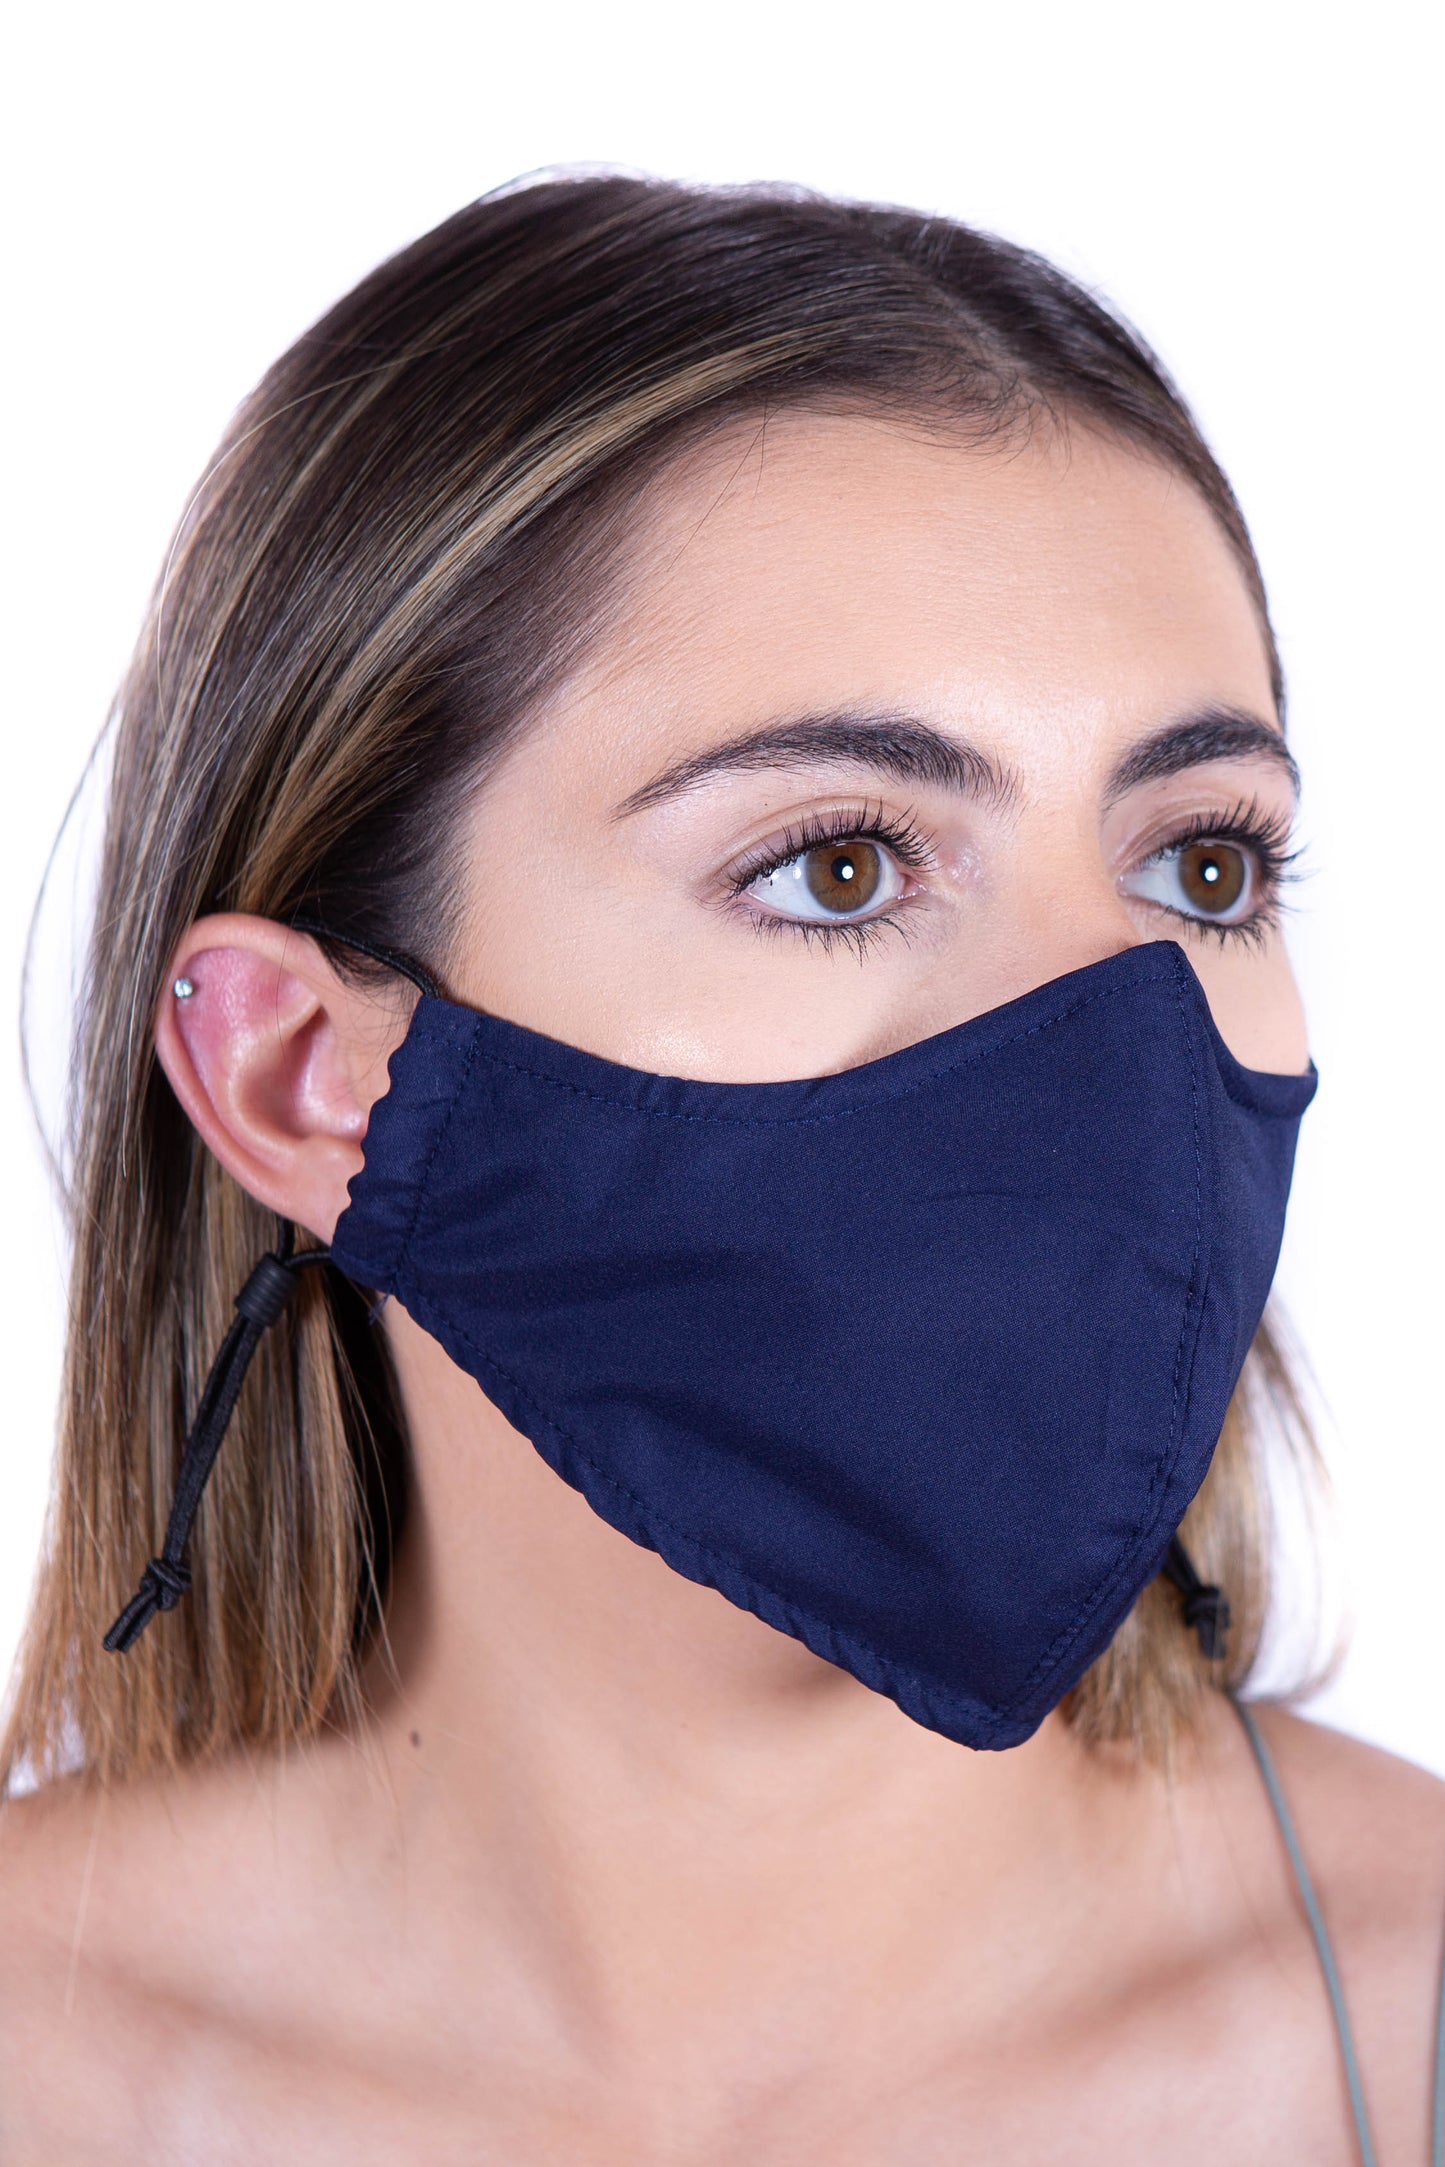 Low Profile 2 Layer Fabric Facemask: Nose Wire, Water Repellent, Washable & Breathable Face Mask w/Adjustable Sliders （ 7 Colors）